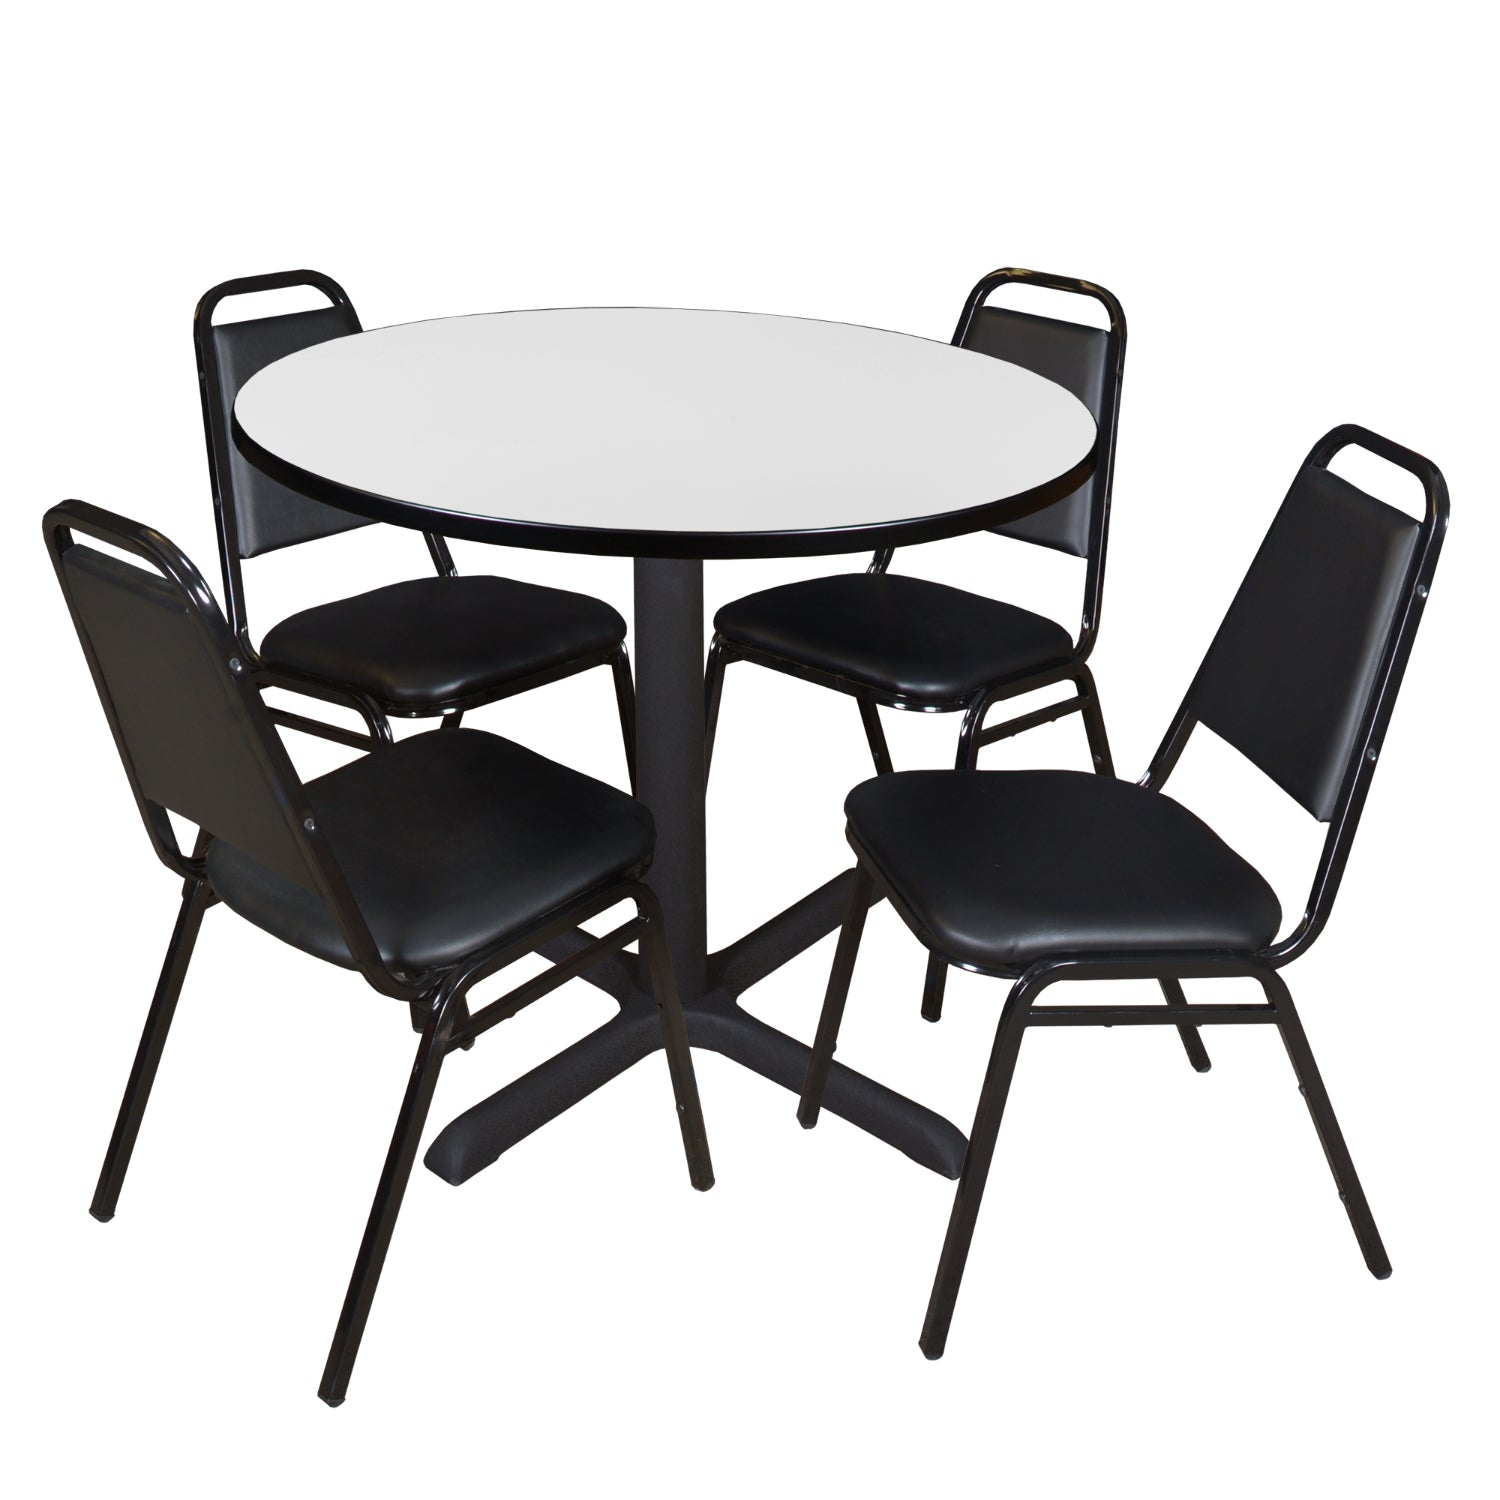 Cain Round Breakroom Table and Chair Package, Cain 36" Round X-Base Breakroom Table with 4 Restaurant Stack Chairs